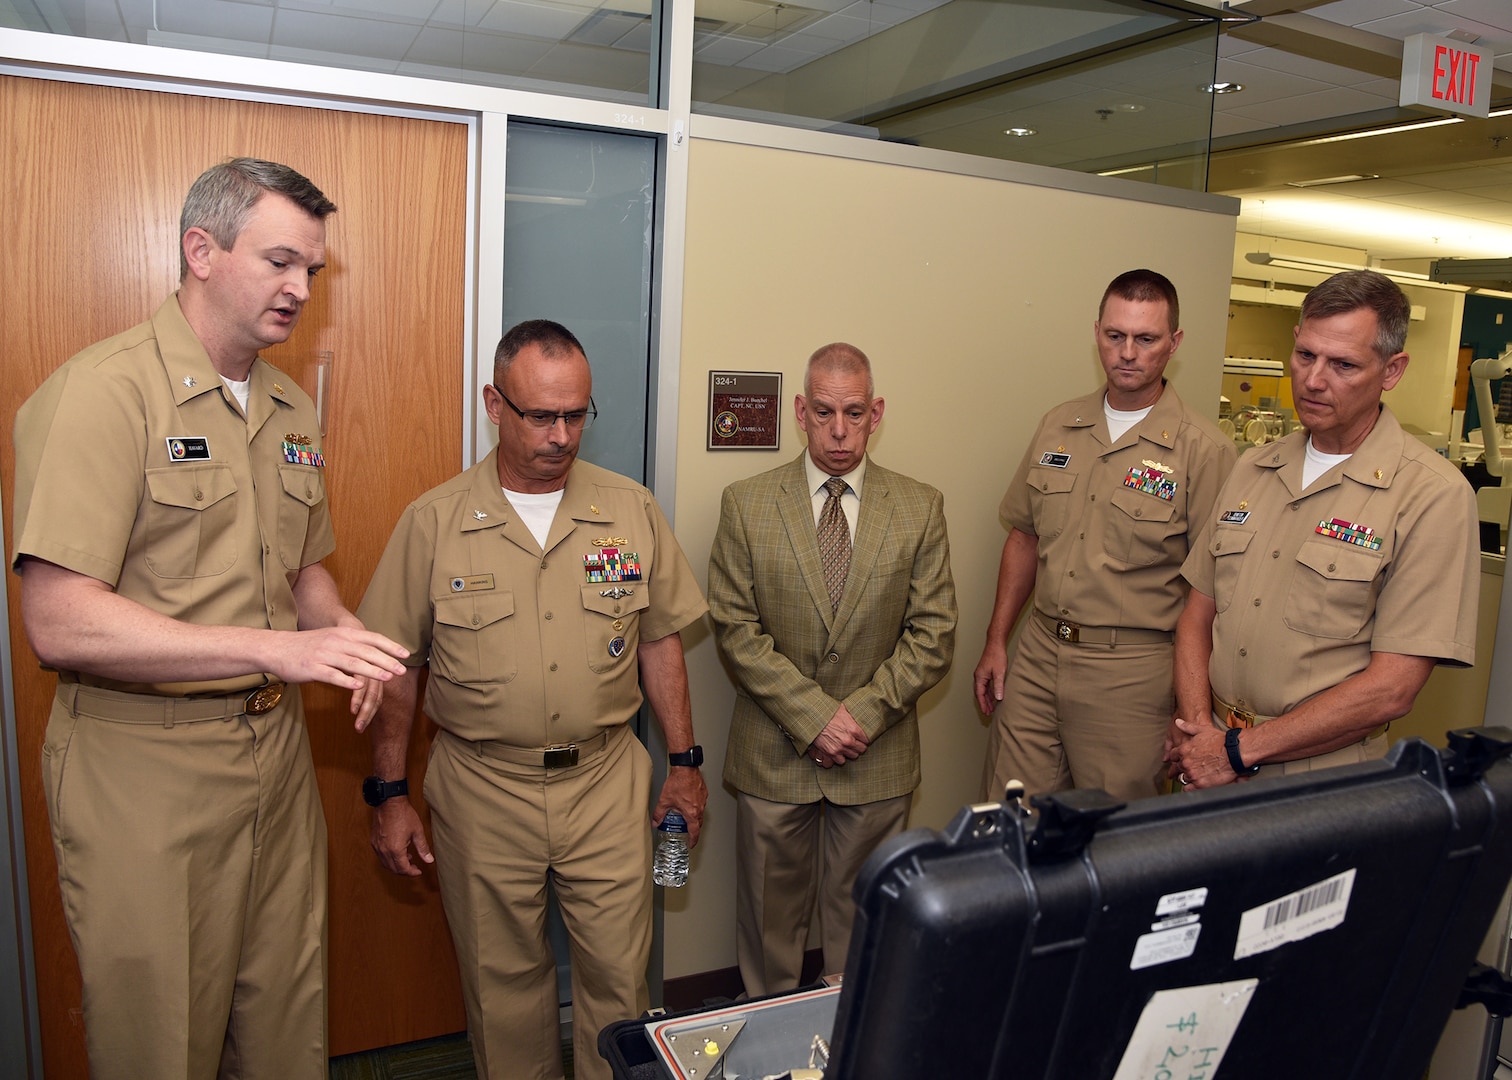 JOINT BASE SAN ANTONIO-FORT SAM HOUSTON – (Aug. 3, 2023) – Cmdr. Drew Havard (left), deputy director of Craniofacial Health and Restorative Medicine (CHRM), Naval Medical Research Unit (NAMRU) San Antonio, joined by Chief Science Director Dr. Sylvain Cardin, Commanding Officer Capt. Gerald DeLong, and Capt. William Deniston, commander, Naval Medical Research Command (NMRC), speaks with Capt. Robert Hawkins, director, J3/5/7, Defense Health Agency (DHA) and director, U.S. Navy Nurse Corps, regarding research and capabilities of the portal ozone sterilizer during a tour of NAMRU San Antonio facilities at the Battlefield Health and Trauma Research Institute. Scientists assigned to CHRM integrate research in the areas of biomaterials, biostatistical analysis, environmental surveillance, epidemiology, infection control, and maxillofacial injury. NAMRU San Antonio’s mission is to conduct gap driven combat casualty care, craniofacial, and directed energy research to improve survival, operational readiness, and safety of Department of Defense (DoD) personnel engaged in routine and expeditionary operations. It is one of the leading research and development laboratories for the U.S. Navy under the DoD and is one of eight subordinate research commands in the global network of laboratories operating under NMRC in Silver Spring, Md. (U.S. Navy photo by Burrell Parmer, NAMRU San Antonio Public Affairs/Released)